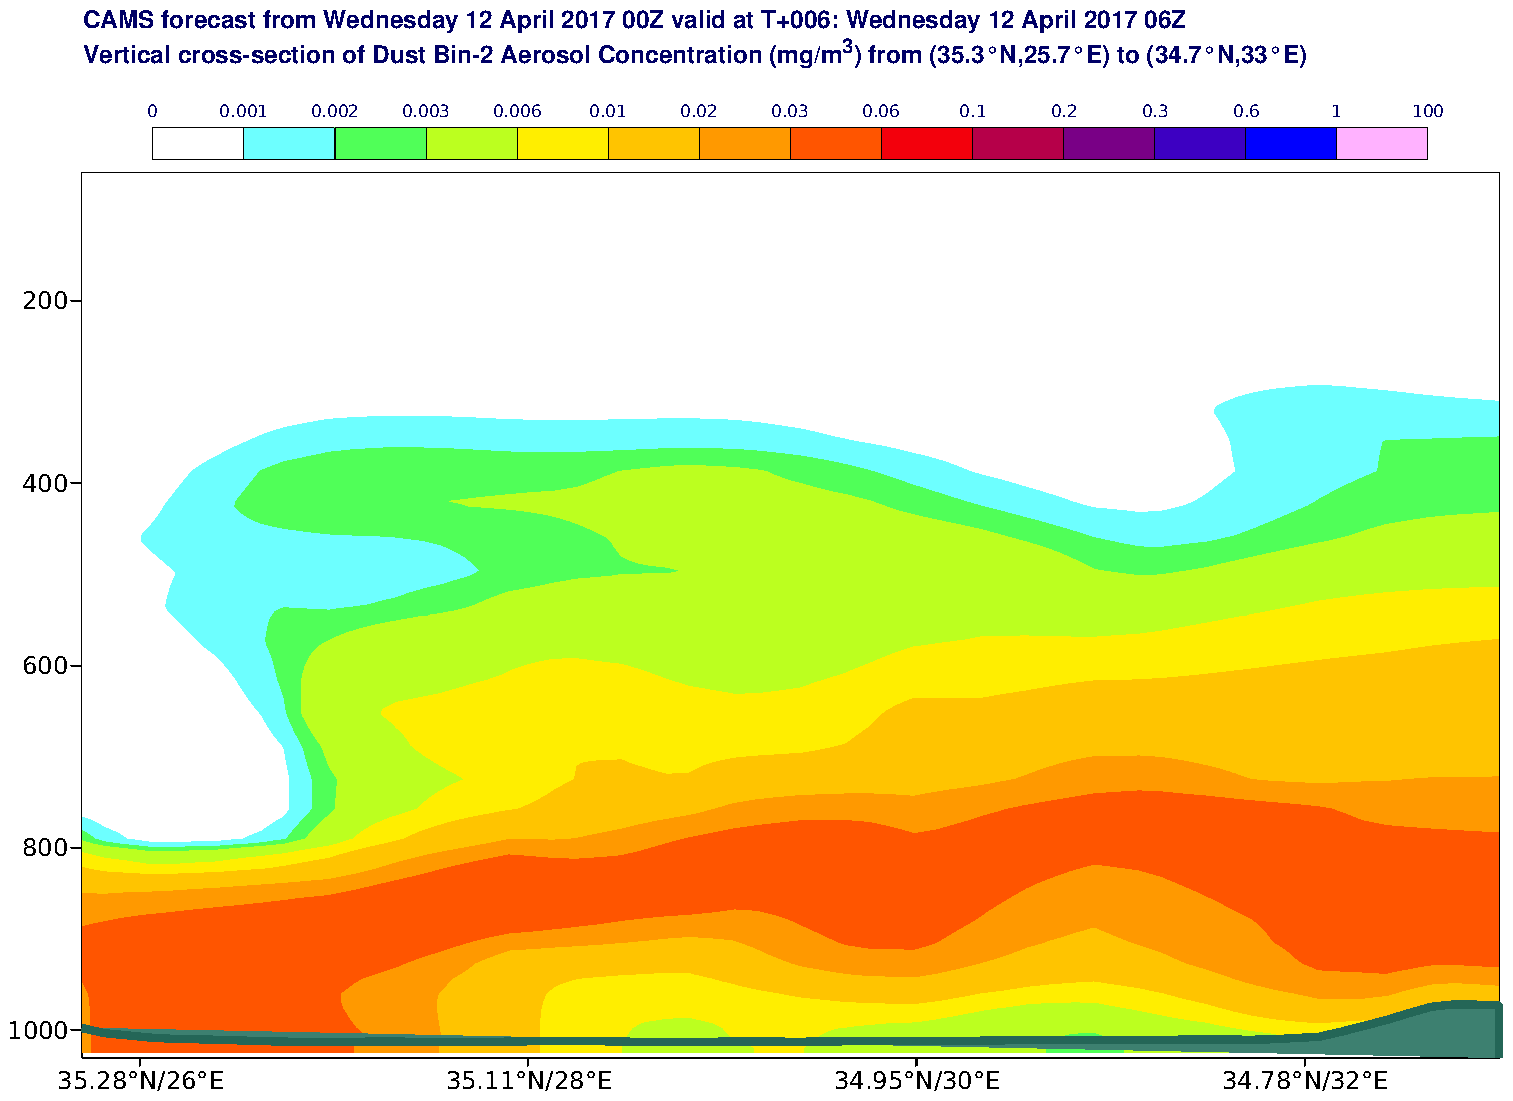 Vertical cross-section of Dust Bin-2 Aerosol Concentration (mg/m3) valid at T6 - 2017-04-12 06:00